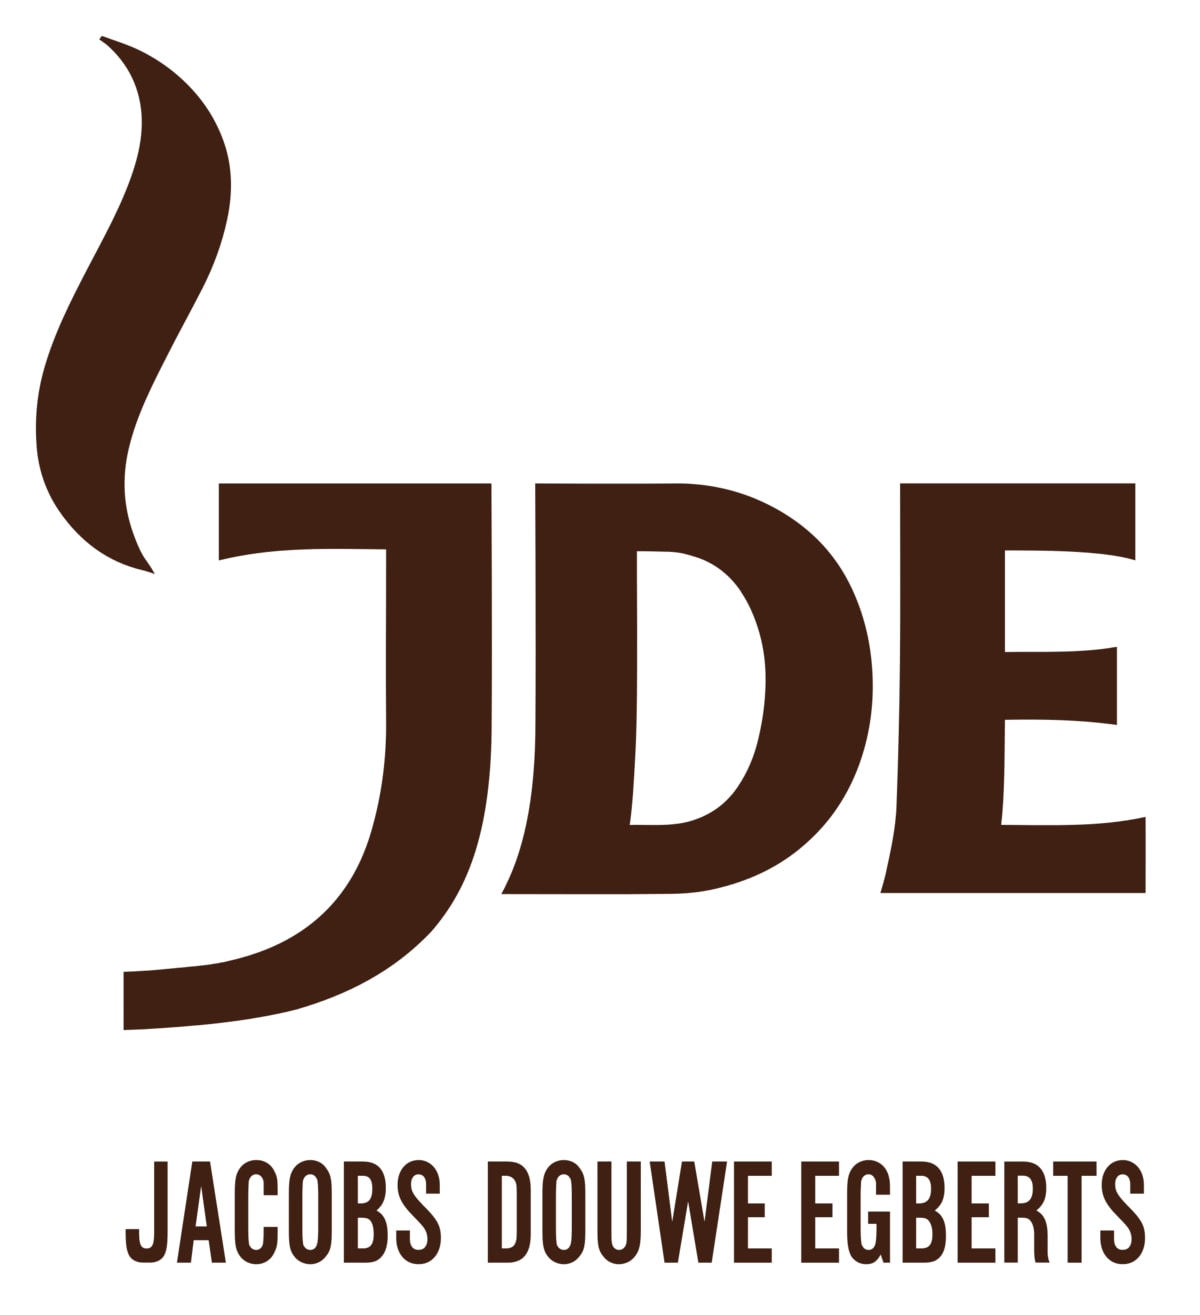 Jacobs - client of HR-Consulting company